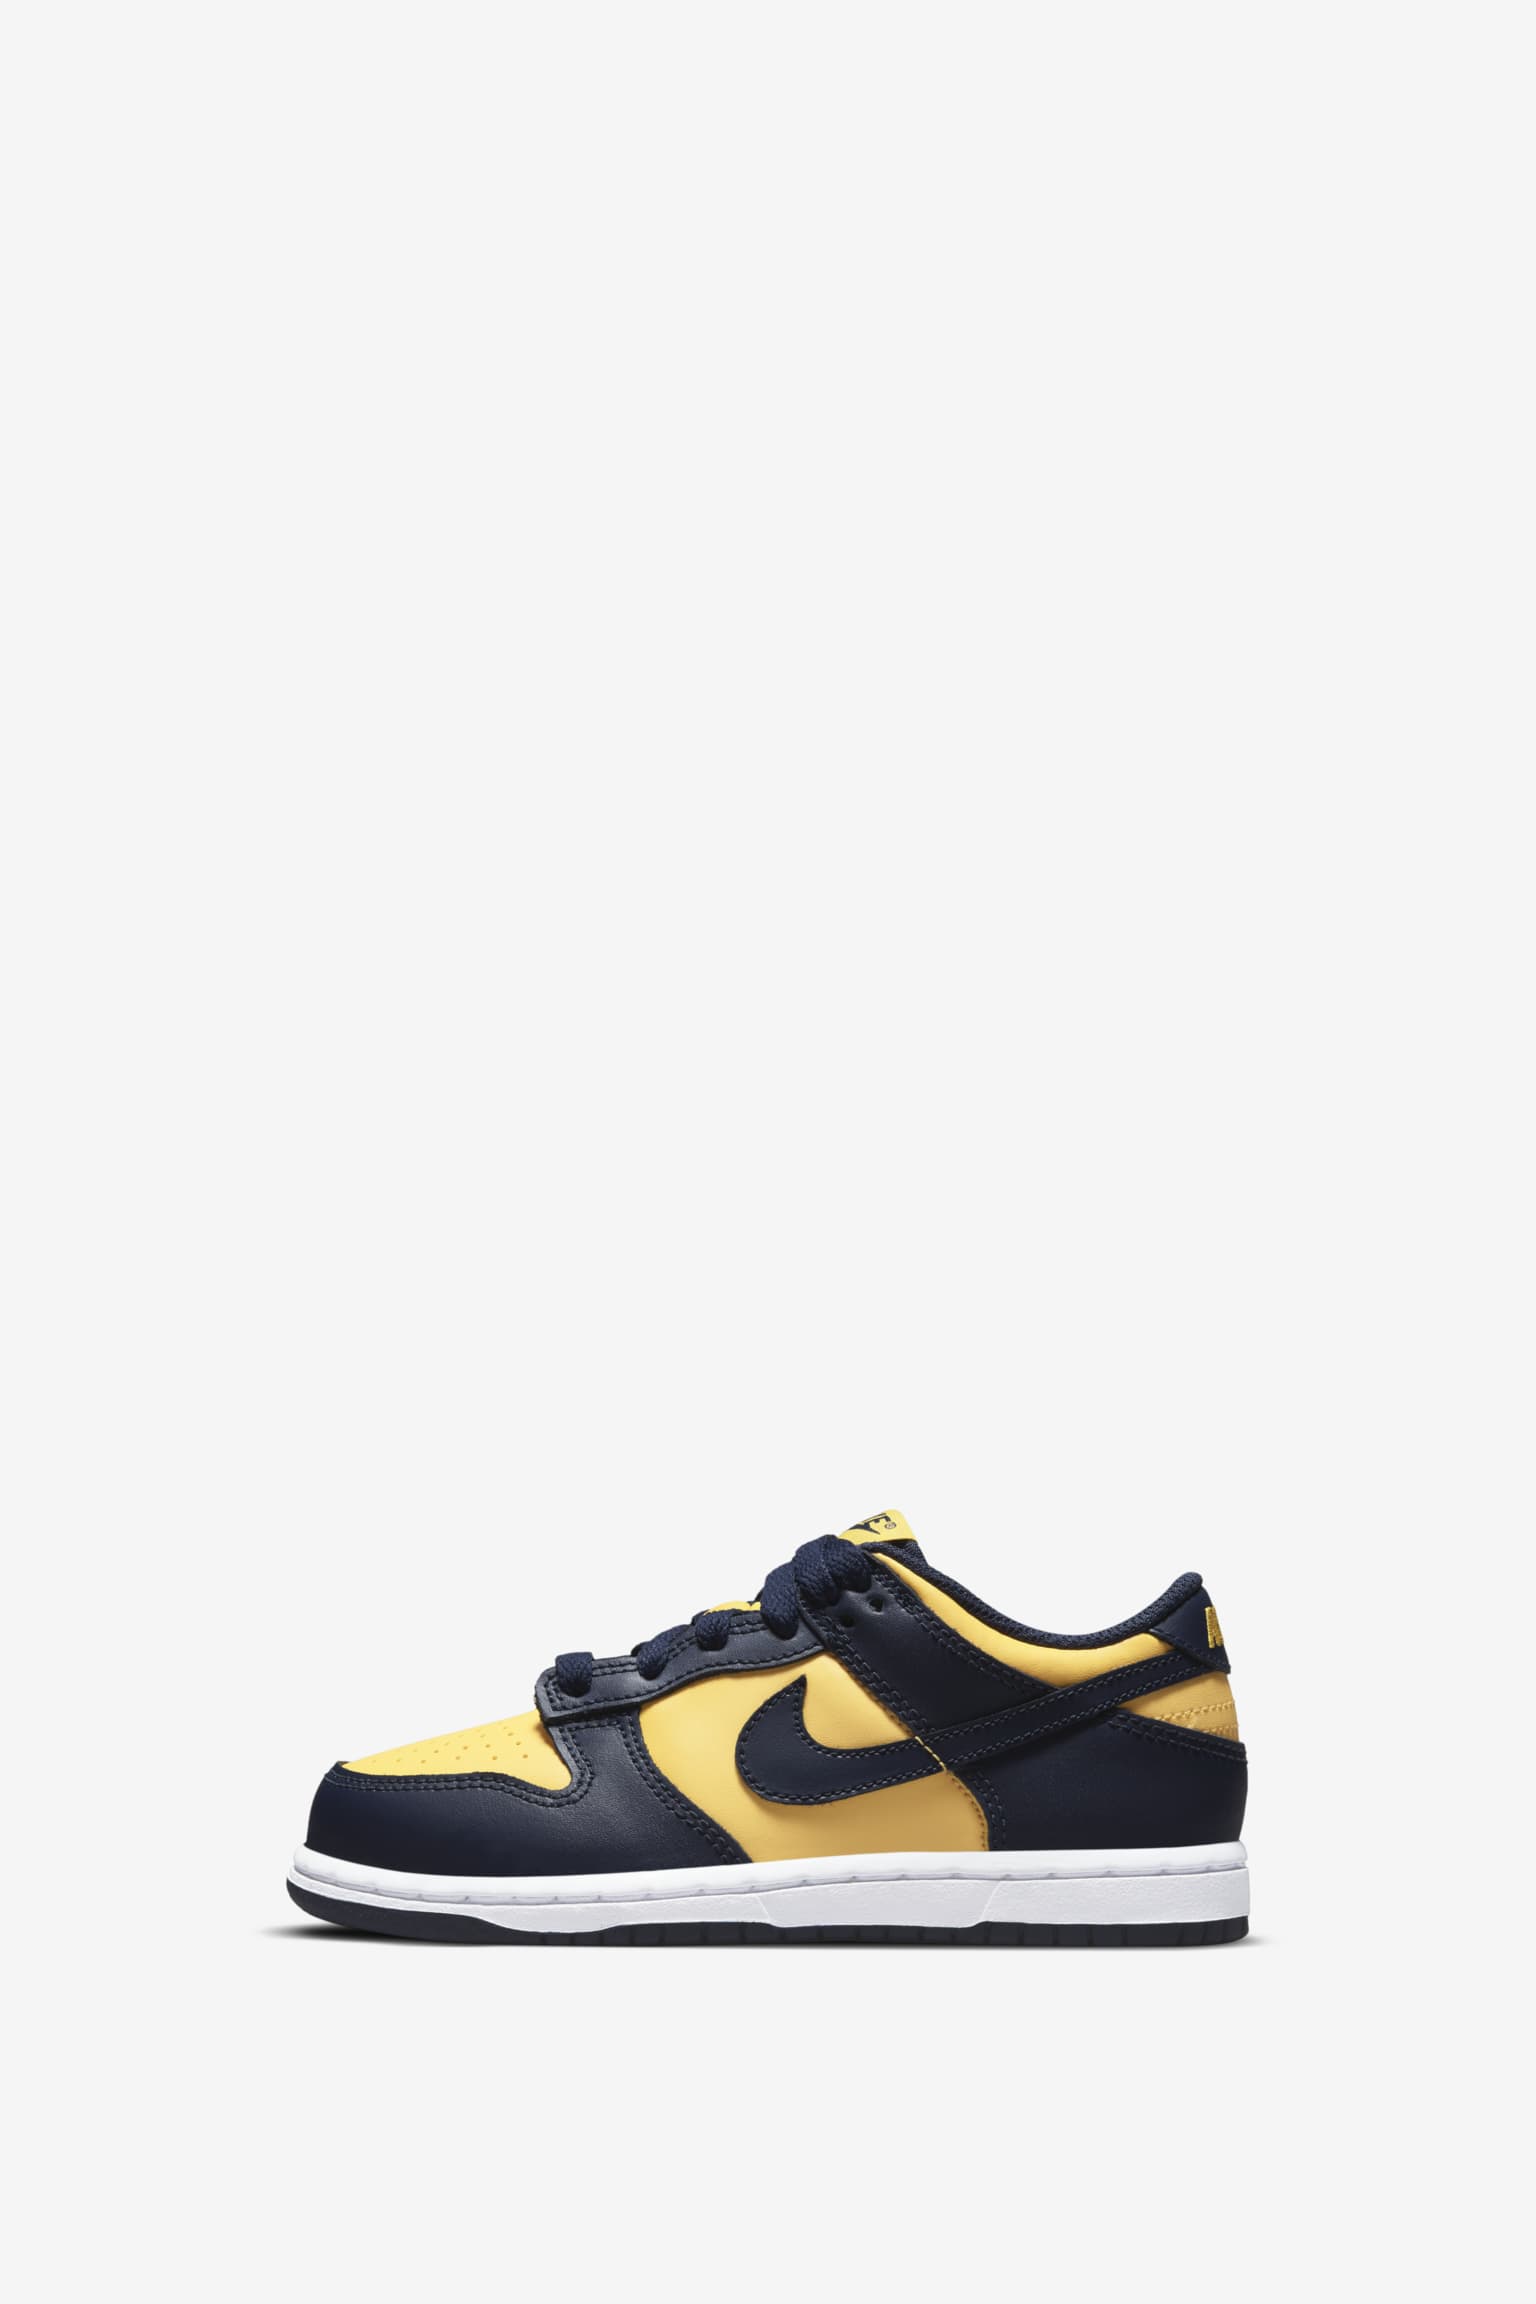 Dunk Low 'Varsity Maize' Release Date. Nike SNKRS PH